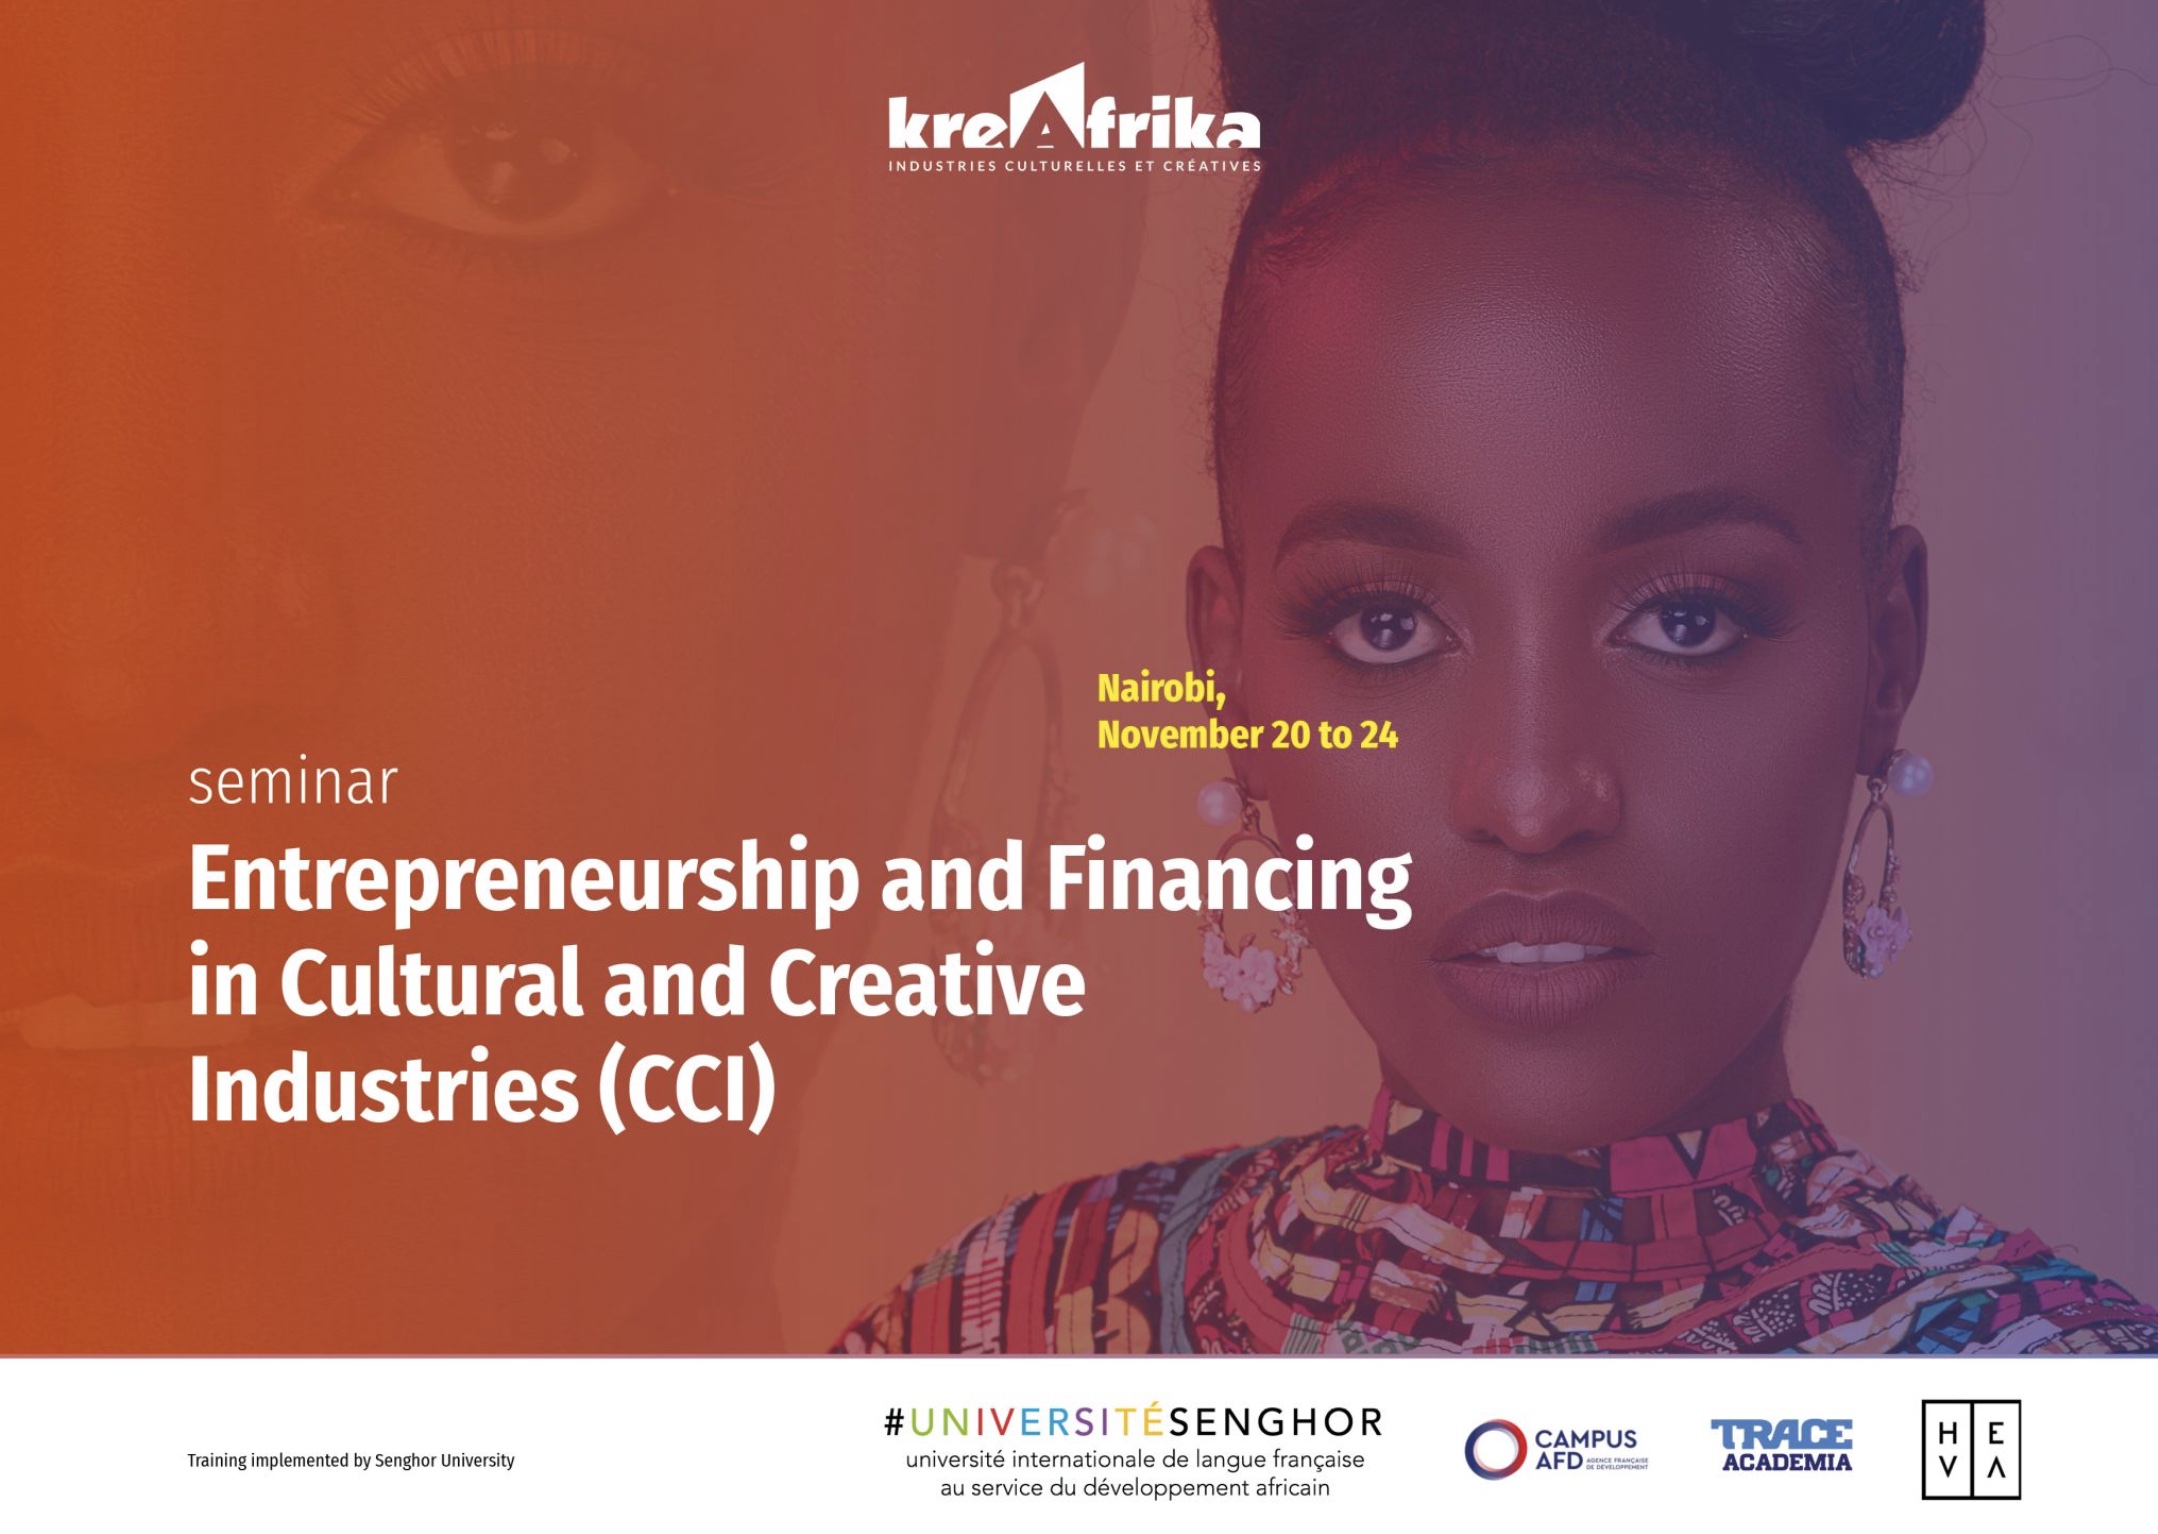 Call For Applications: Entrepreneurship & Financing in Cultural and Creative Industries Training Program 2023